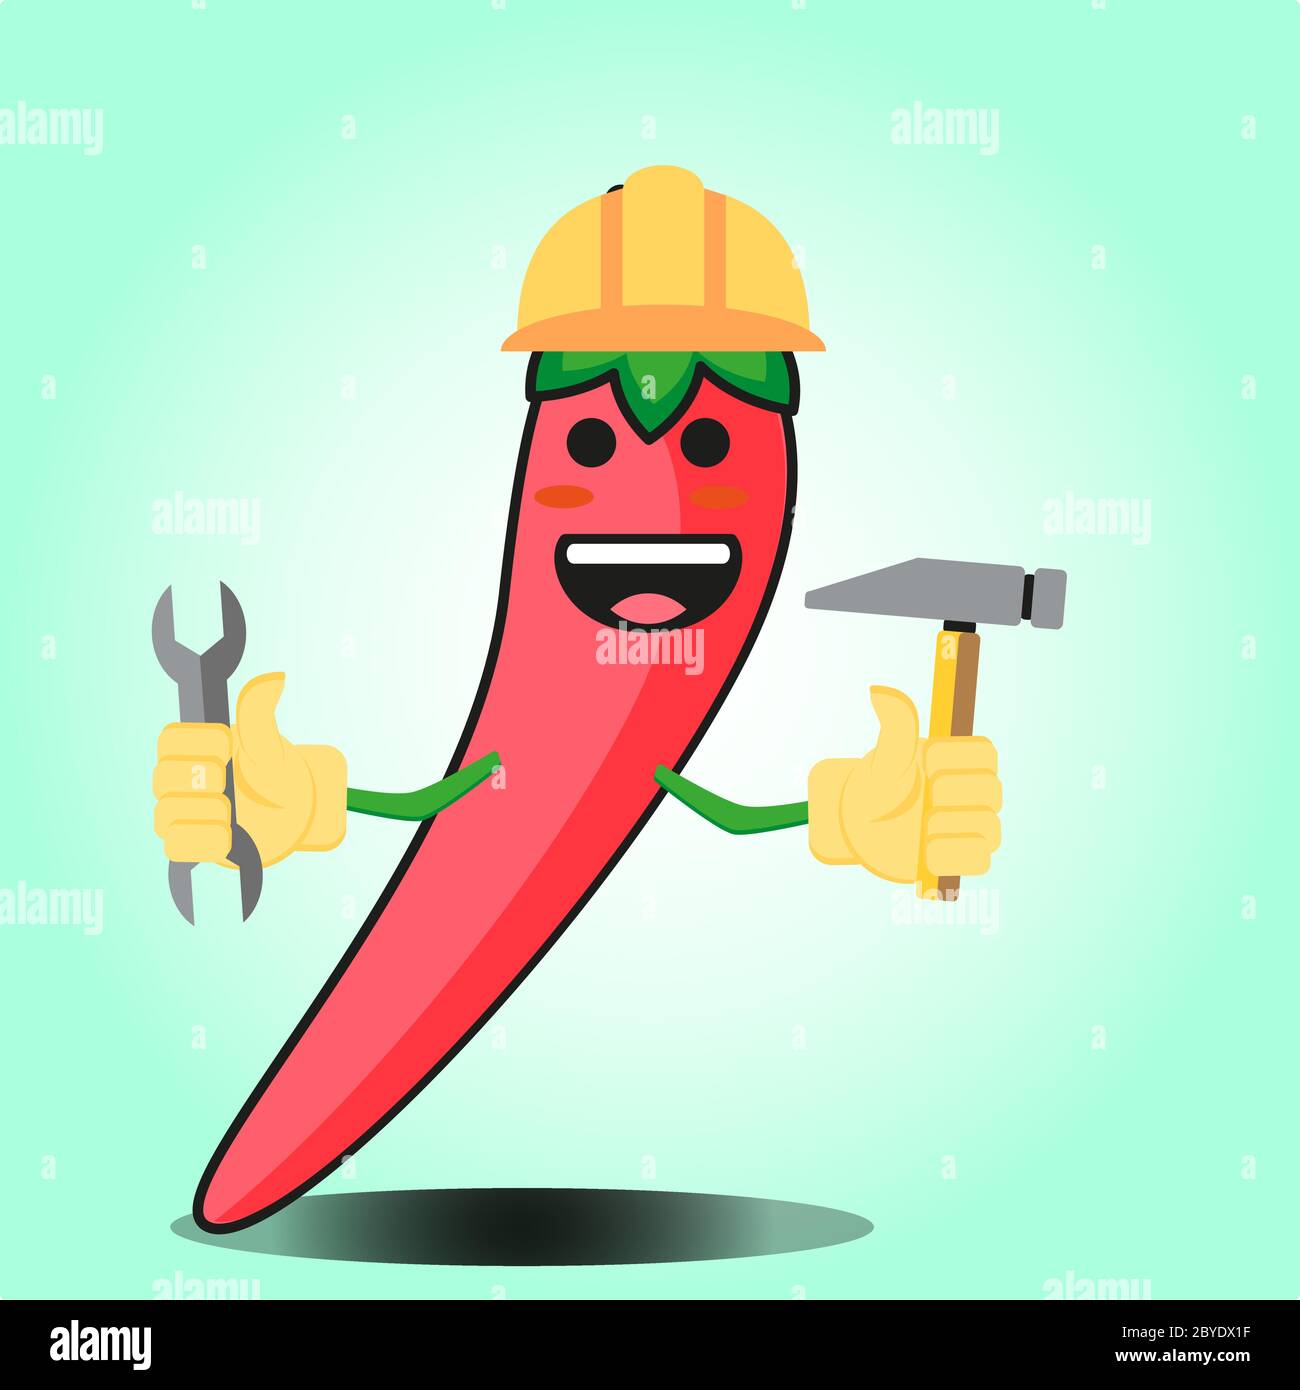 Cute mexican chili engineer cartoon face character with hat, wrench and flower hammer design Stock Vector